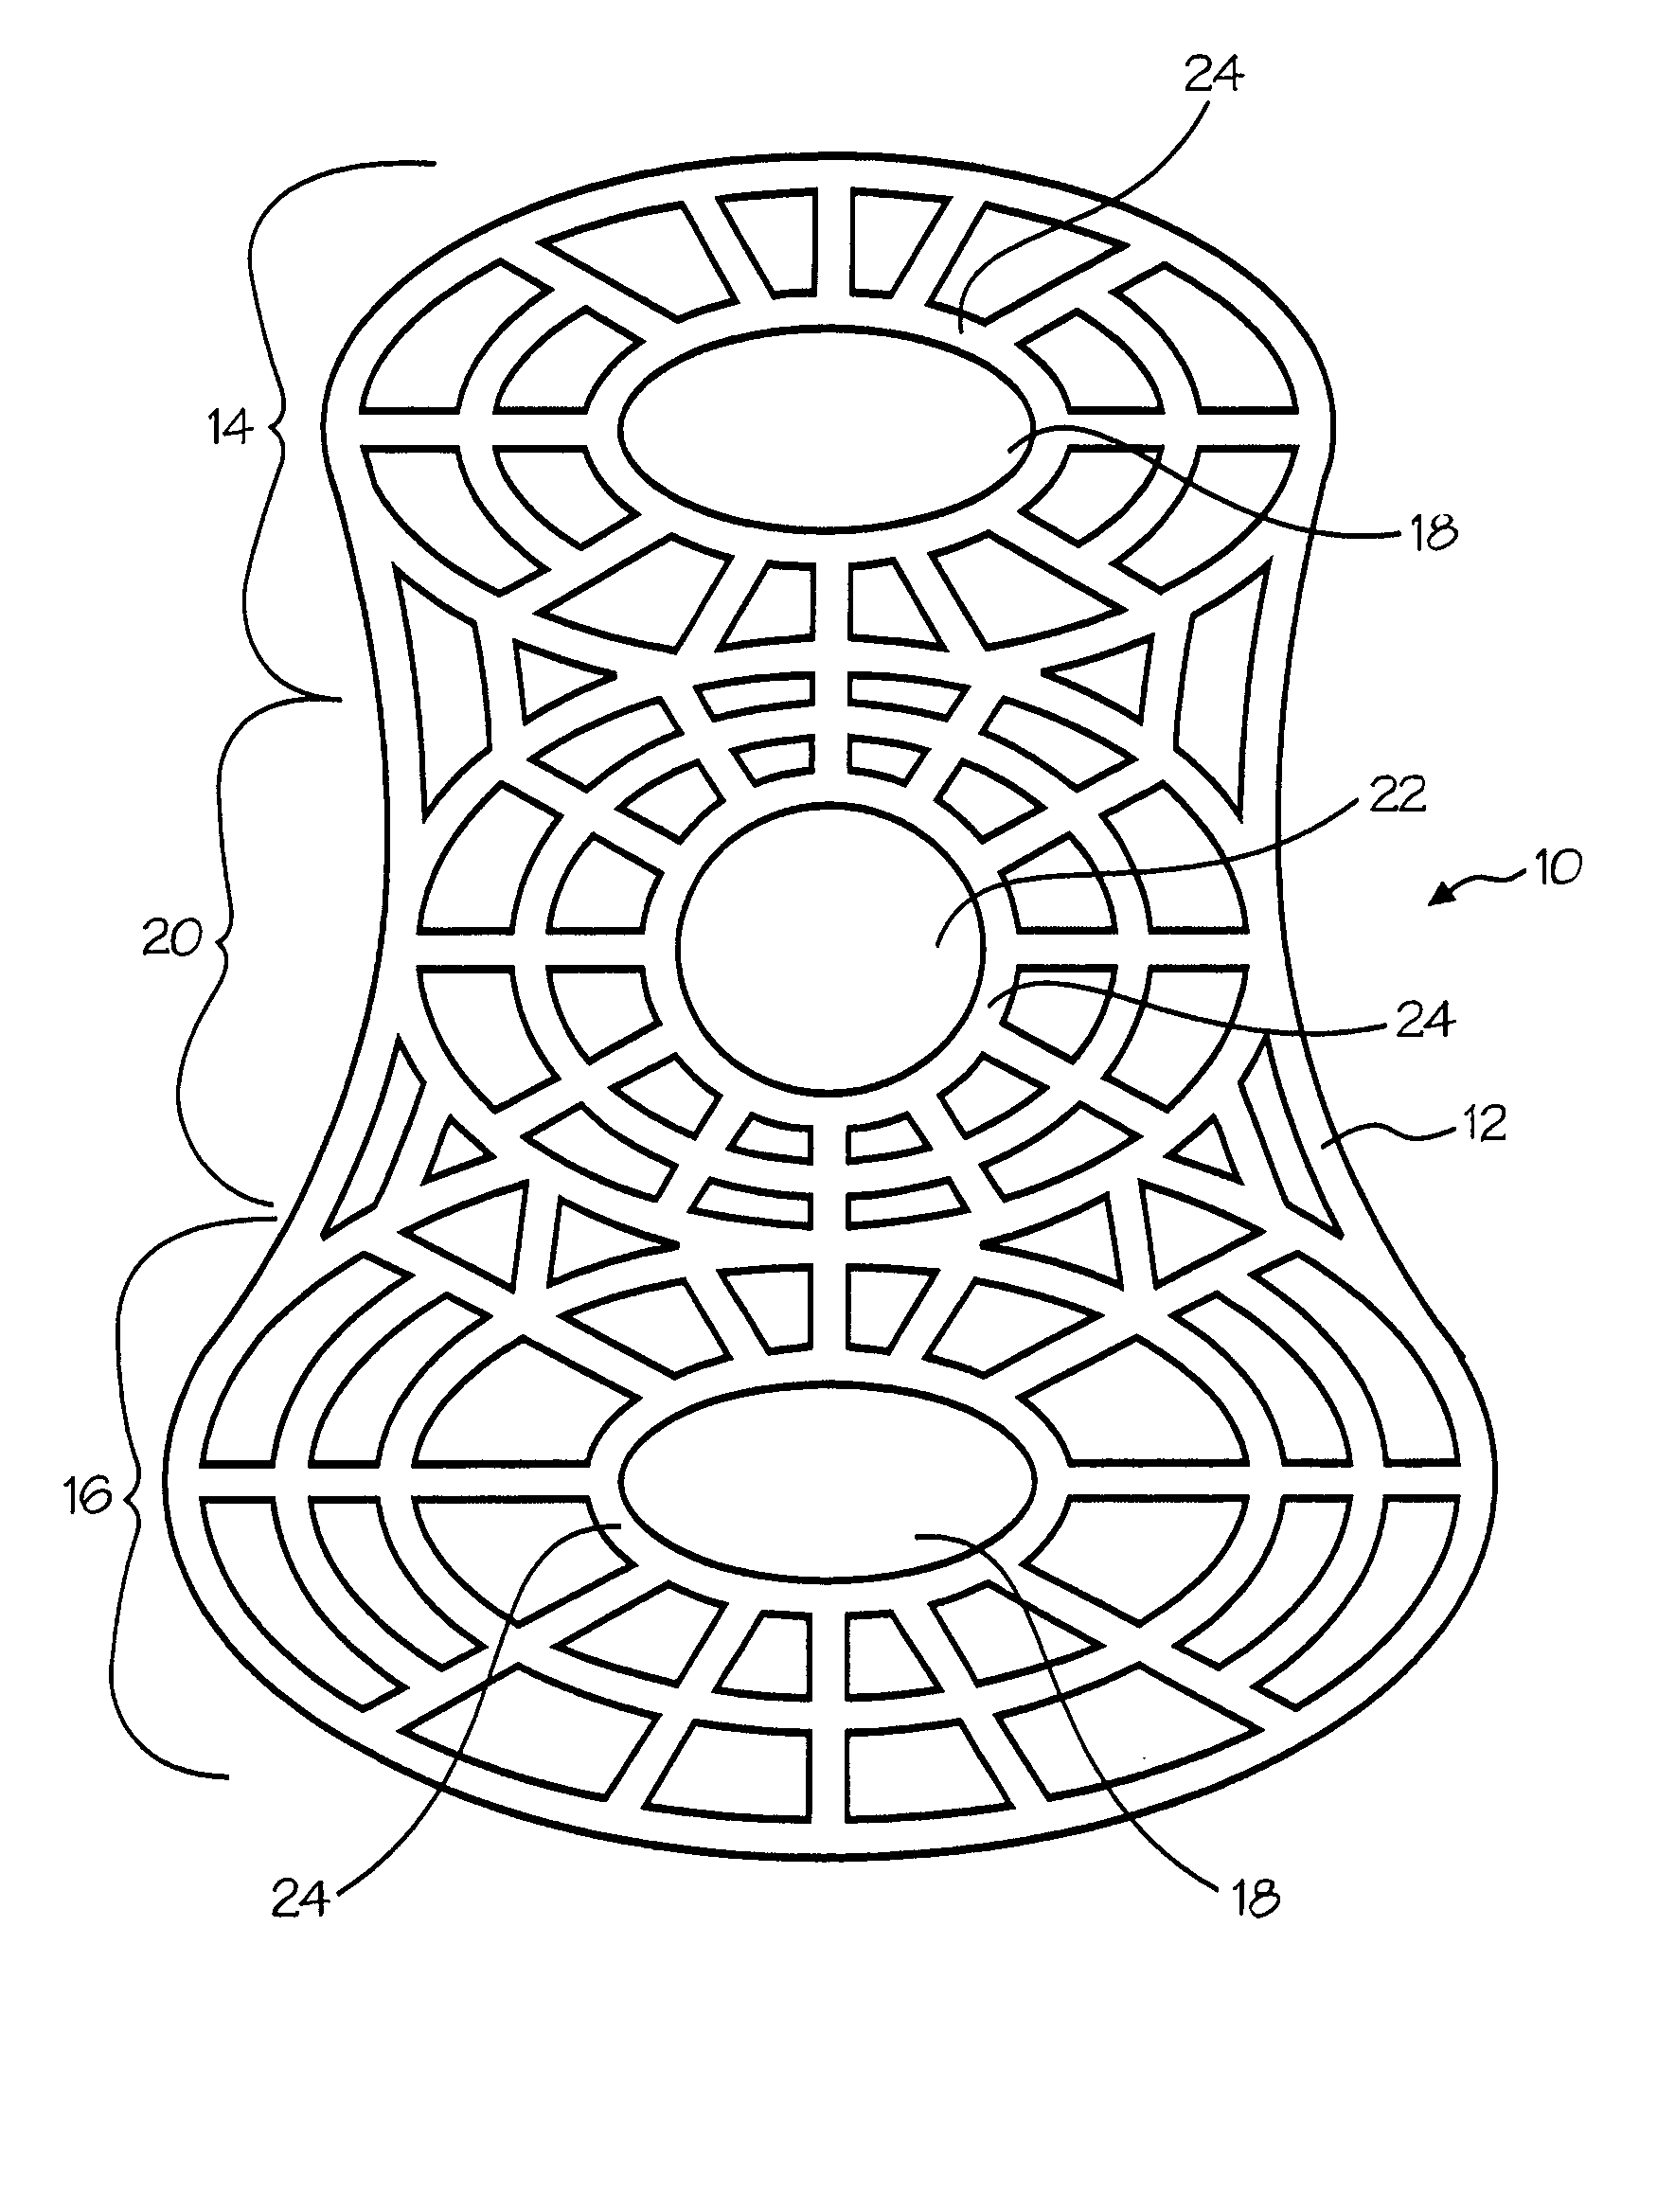 Device for use in stimulating bone growth